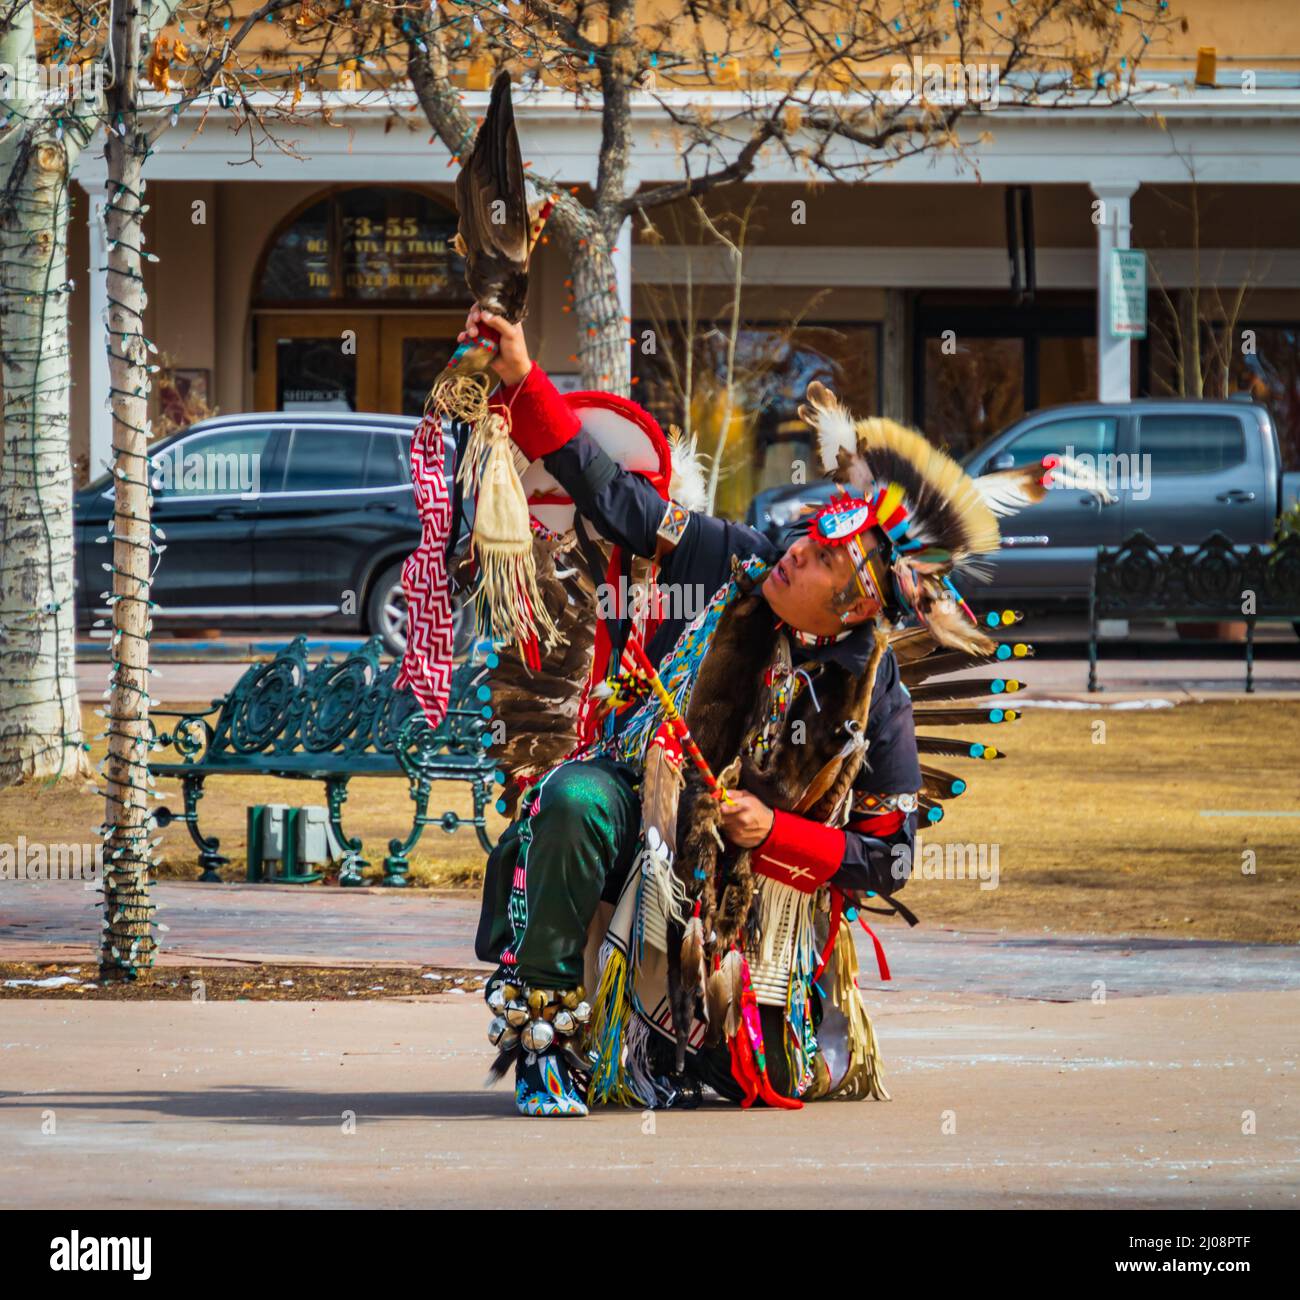 Santa Fe, New Mexico/USA- February 25, 2022: Indigenous native american dancer in traditional costume dancing at the Plaza Stock Photo